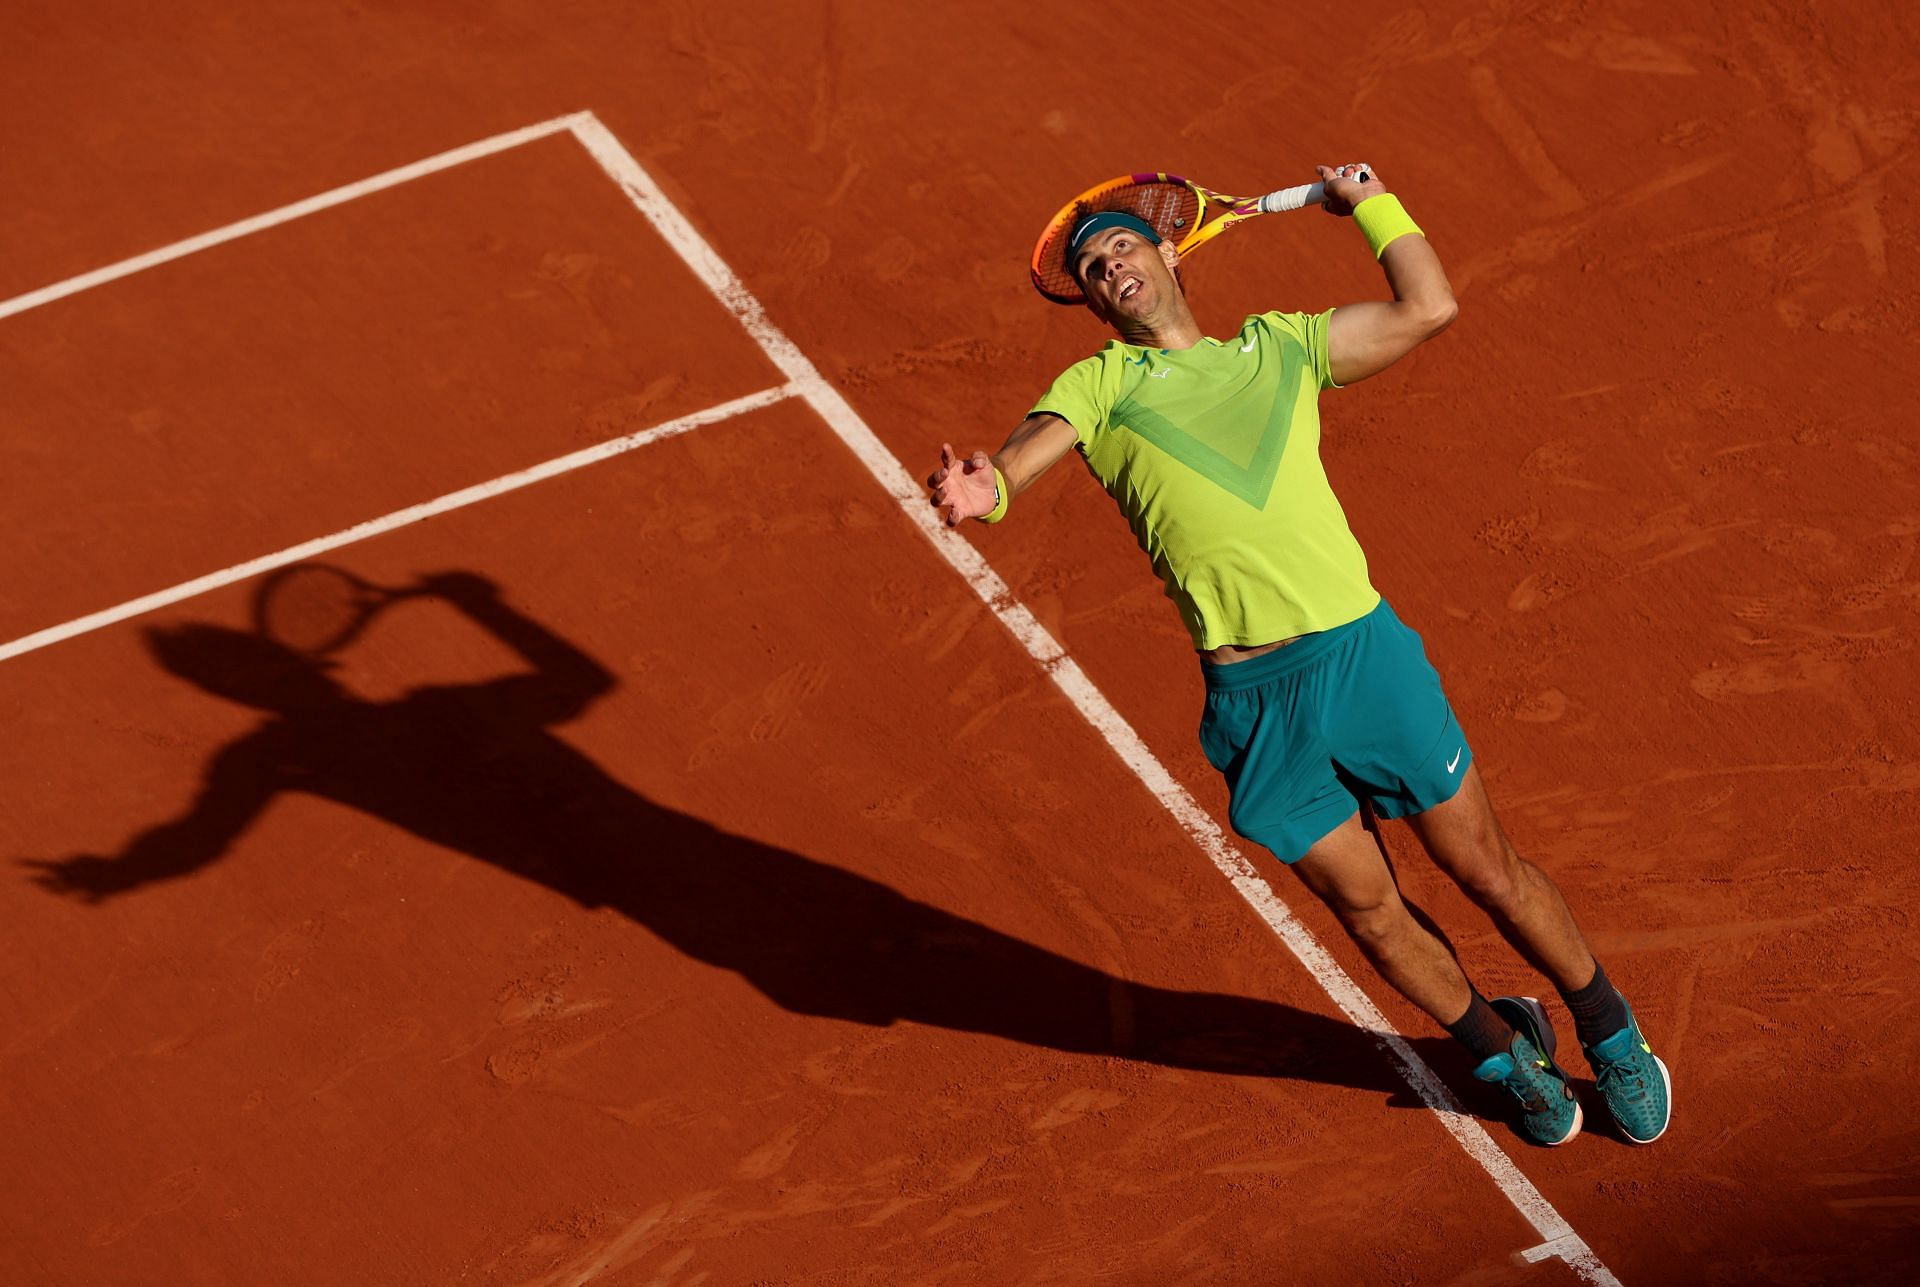 Rafael Nadal in action against Felix Auger-Aliassime at the 2022 French Open